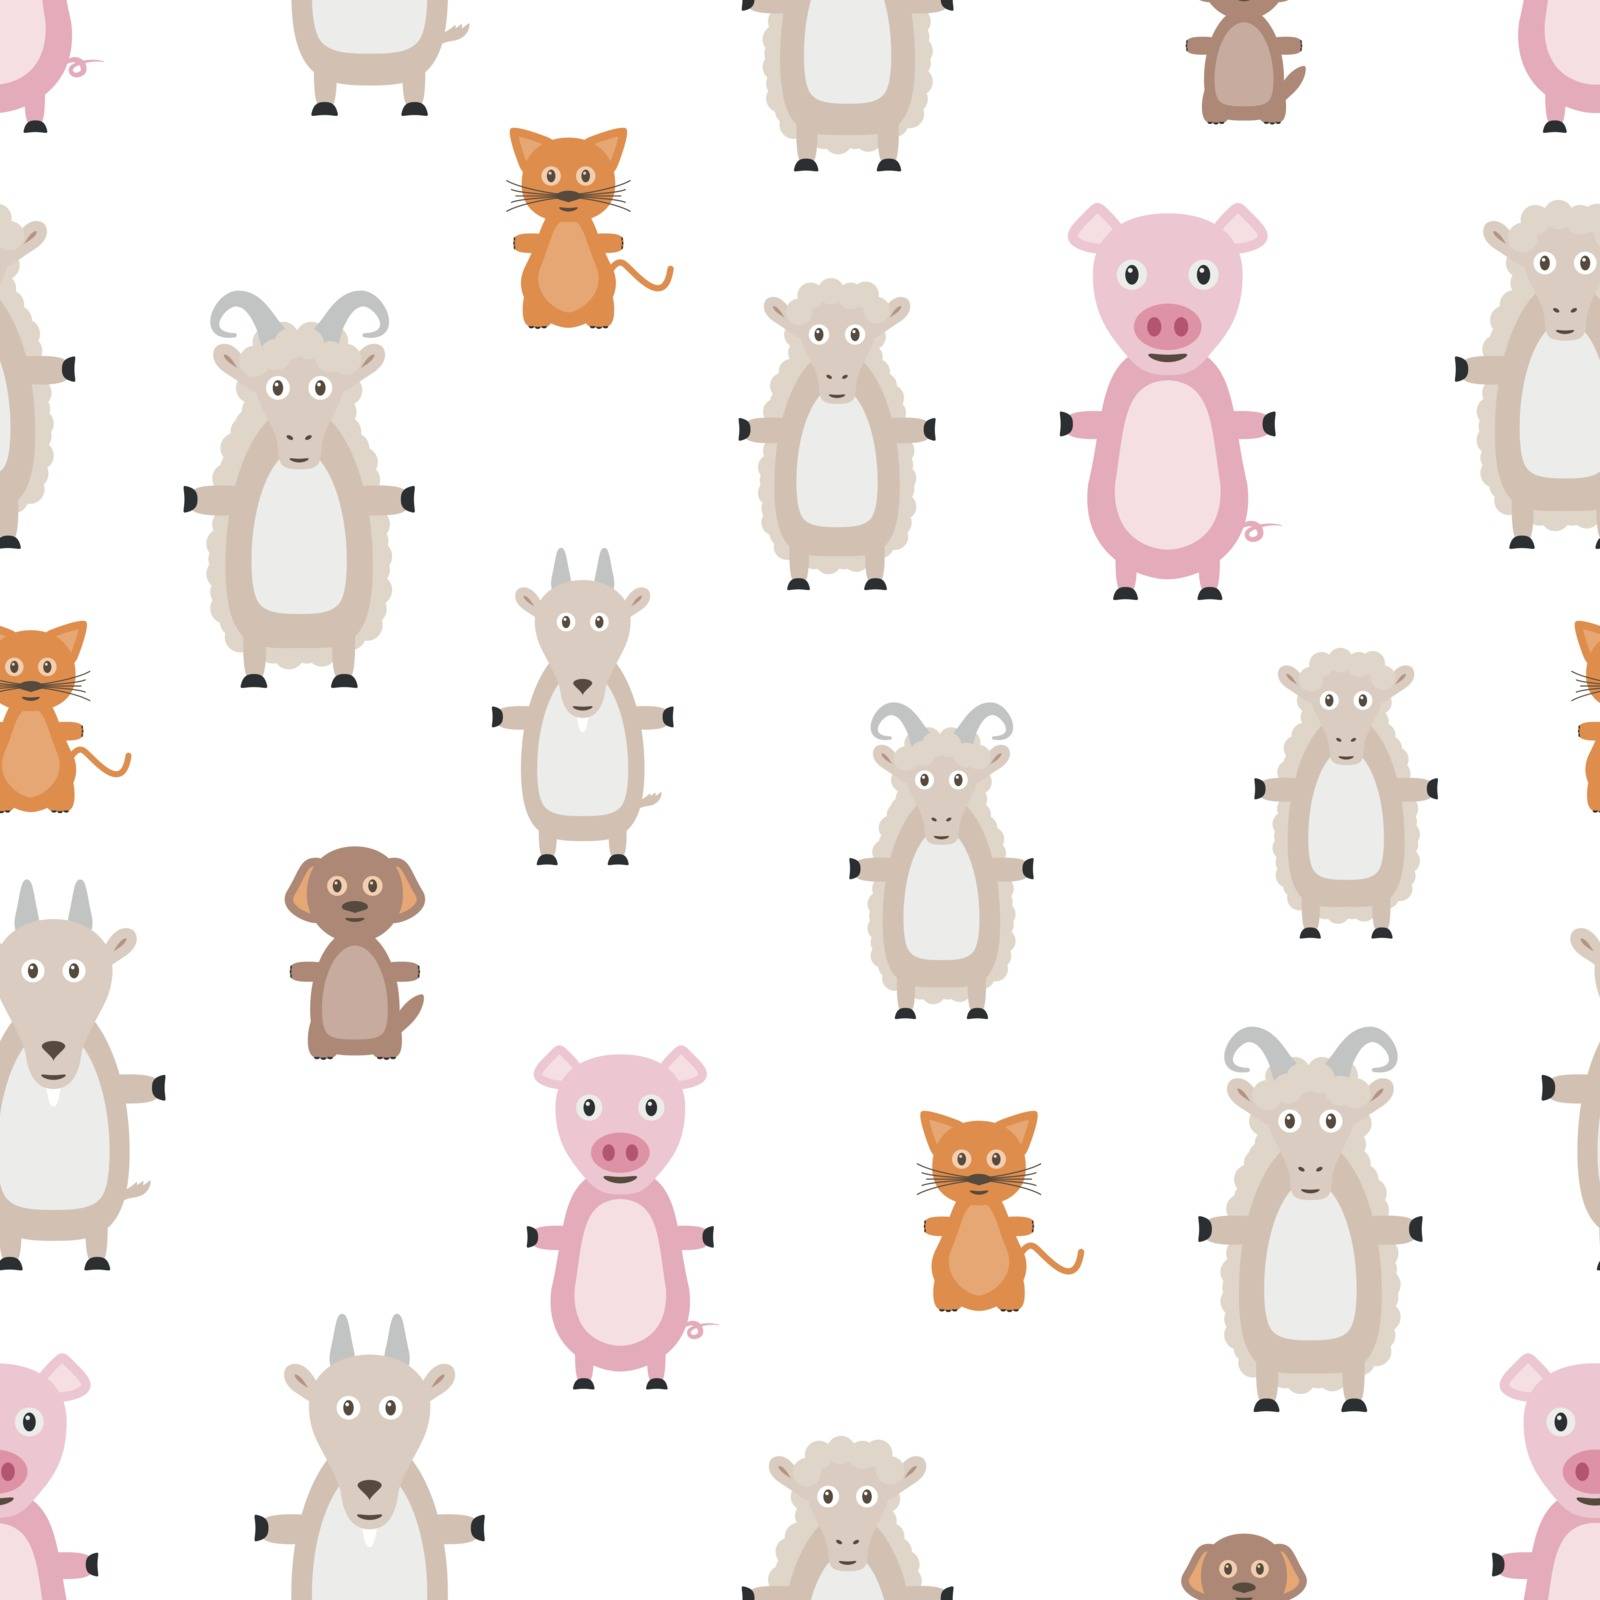 Animals seamless pattern. Repeating background with animals. Flat style.